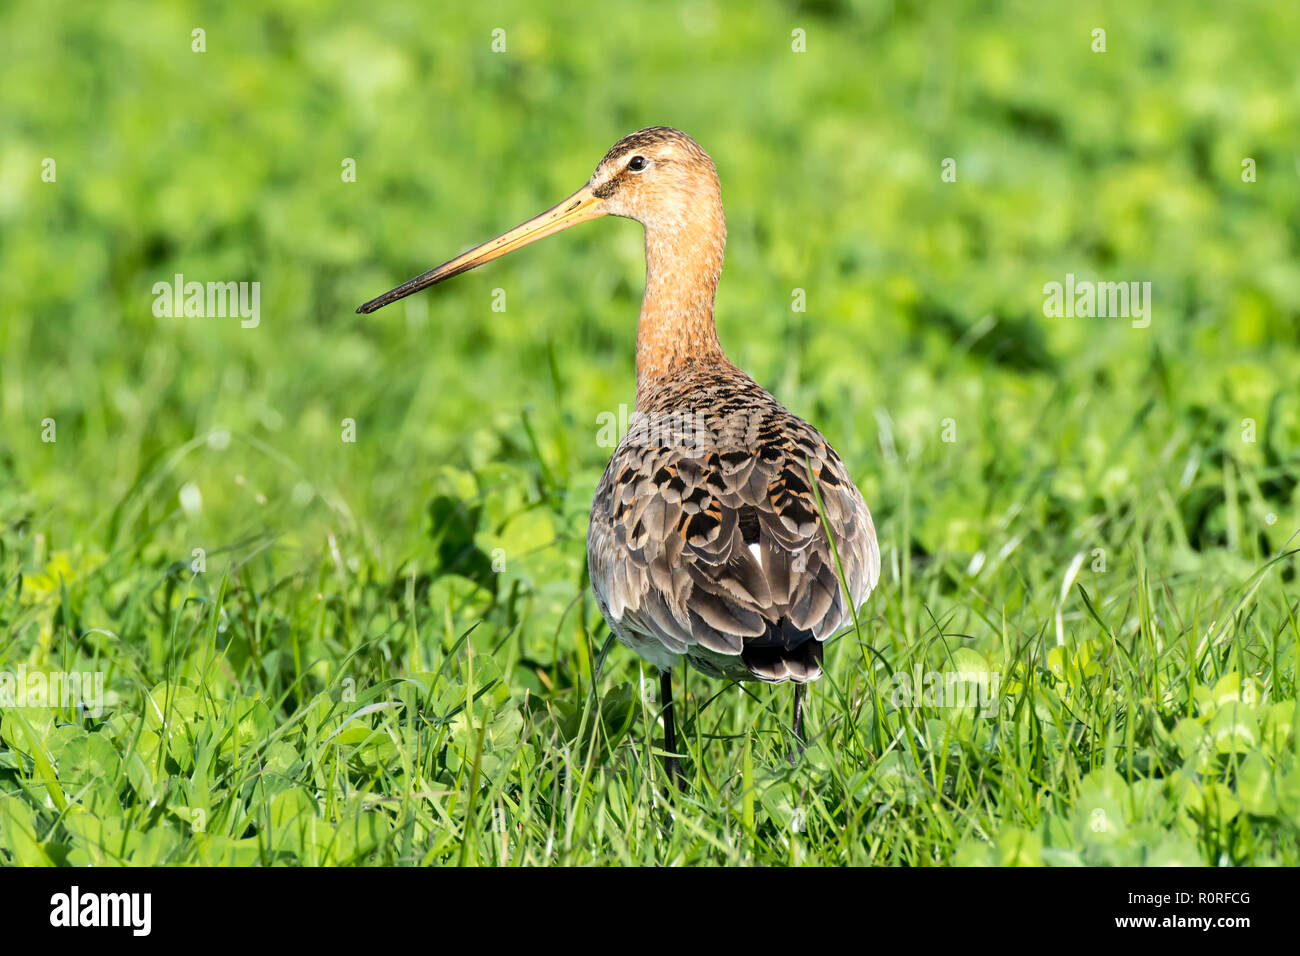 Black-tailed godwit (Limosa limosa) on meadow, Texel, Netherlands Stock Photo